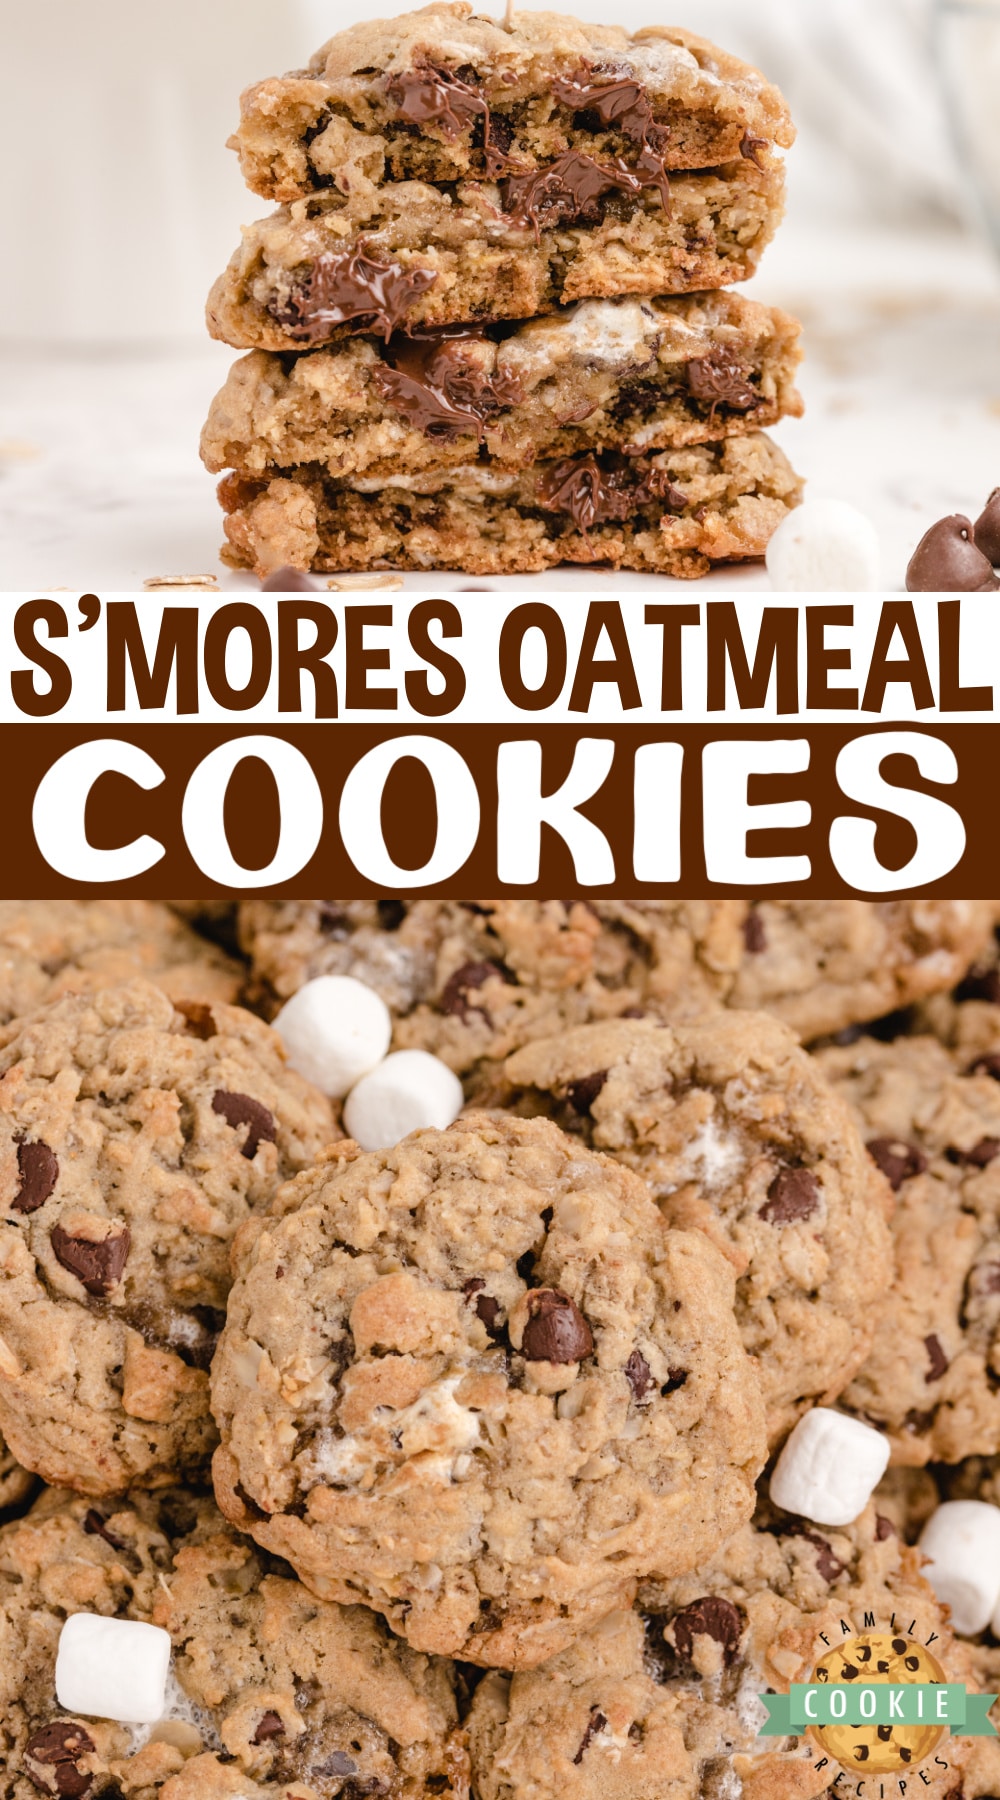 S'mores Oatmeal Cookies are full of oats, chocolate chips and mini marshmallows. Soft, chewy oatmeal cookies that taste just like s'mores! 